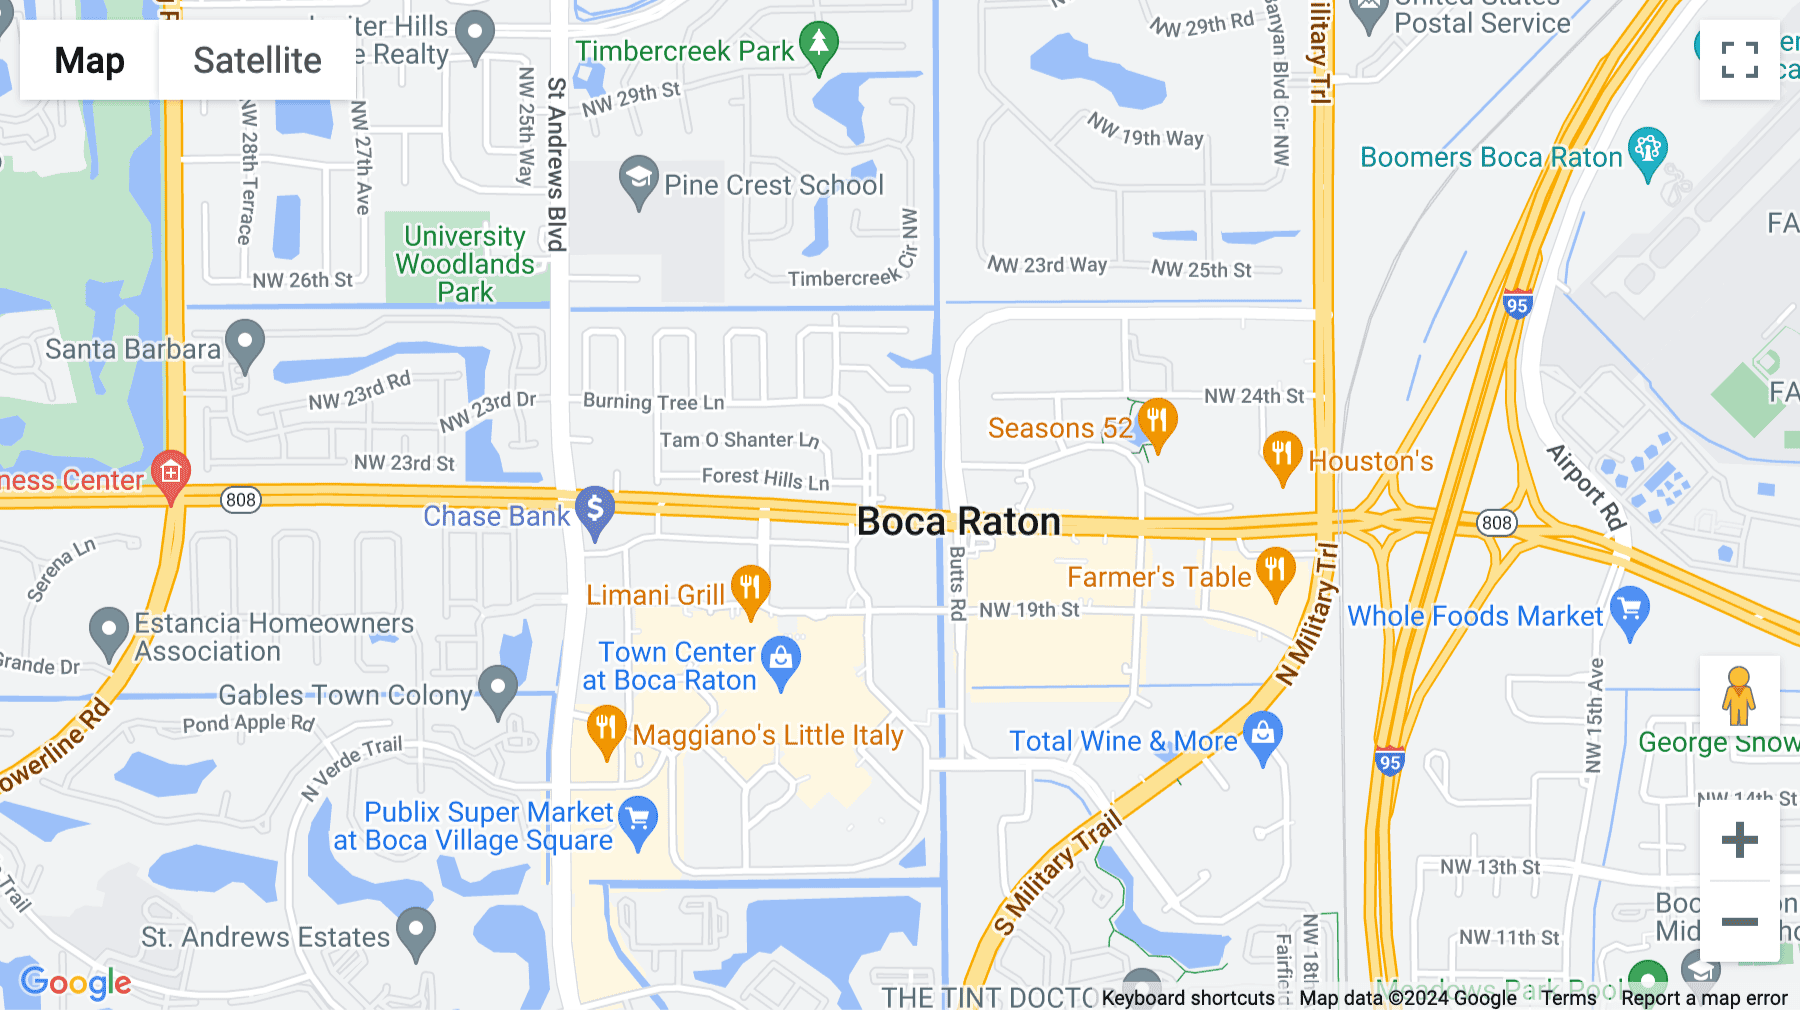 Click for interative map of 2255 Glades Road, Suite 324 A, Glades Road Center, Boca Raton